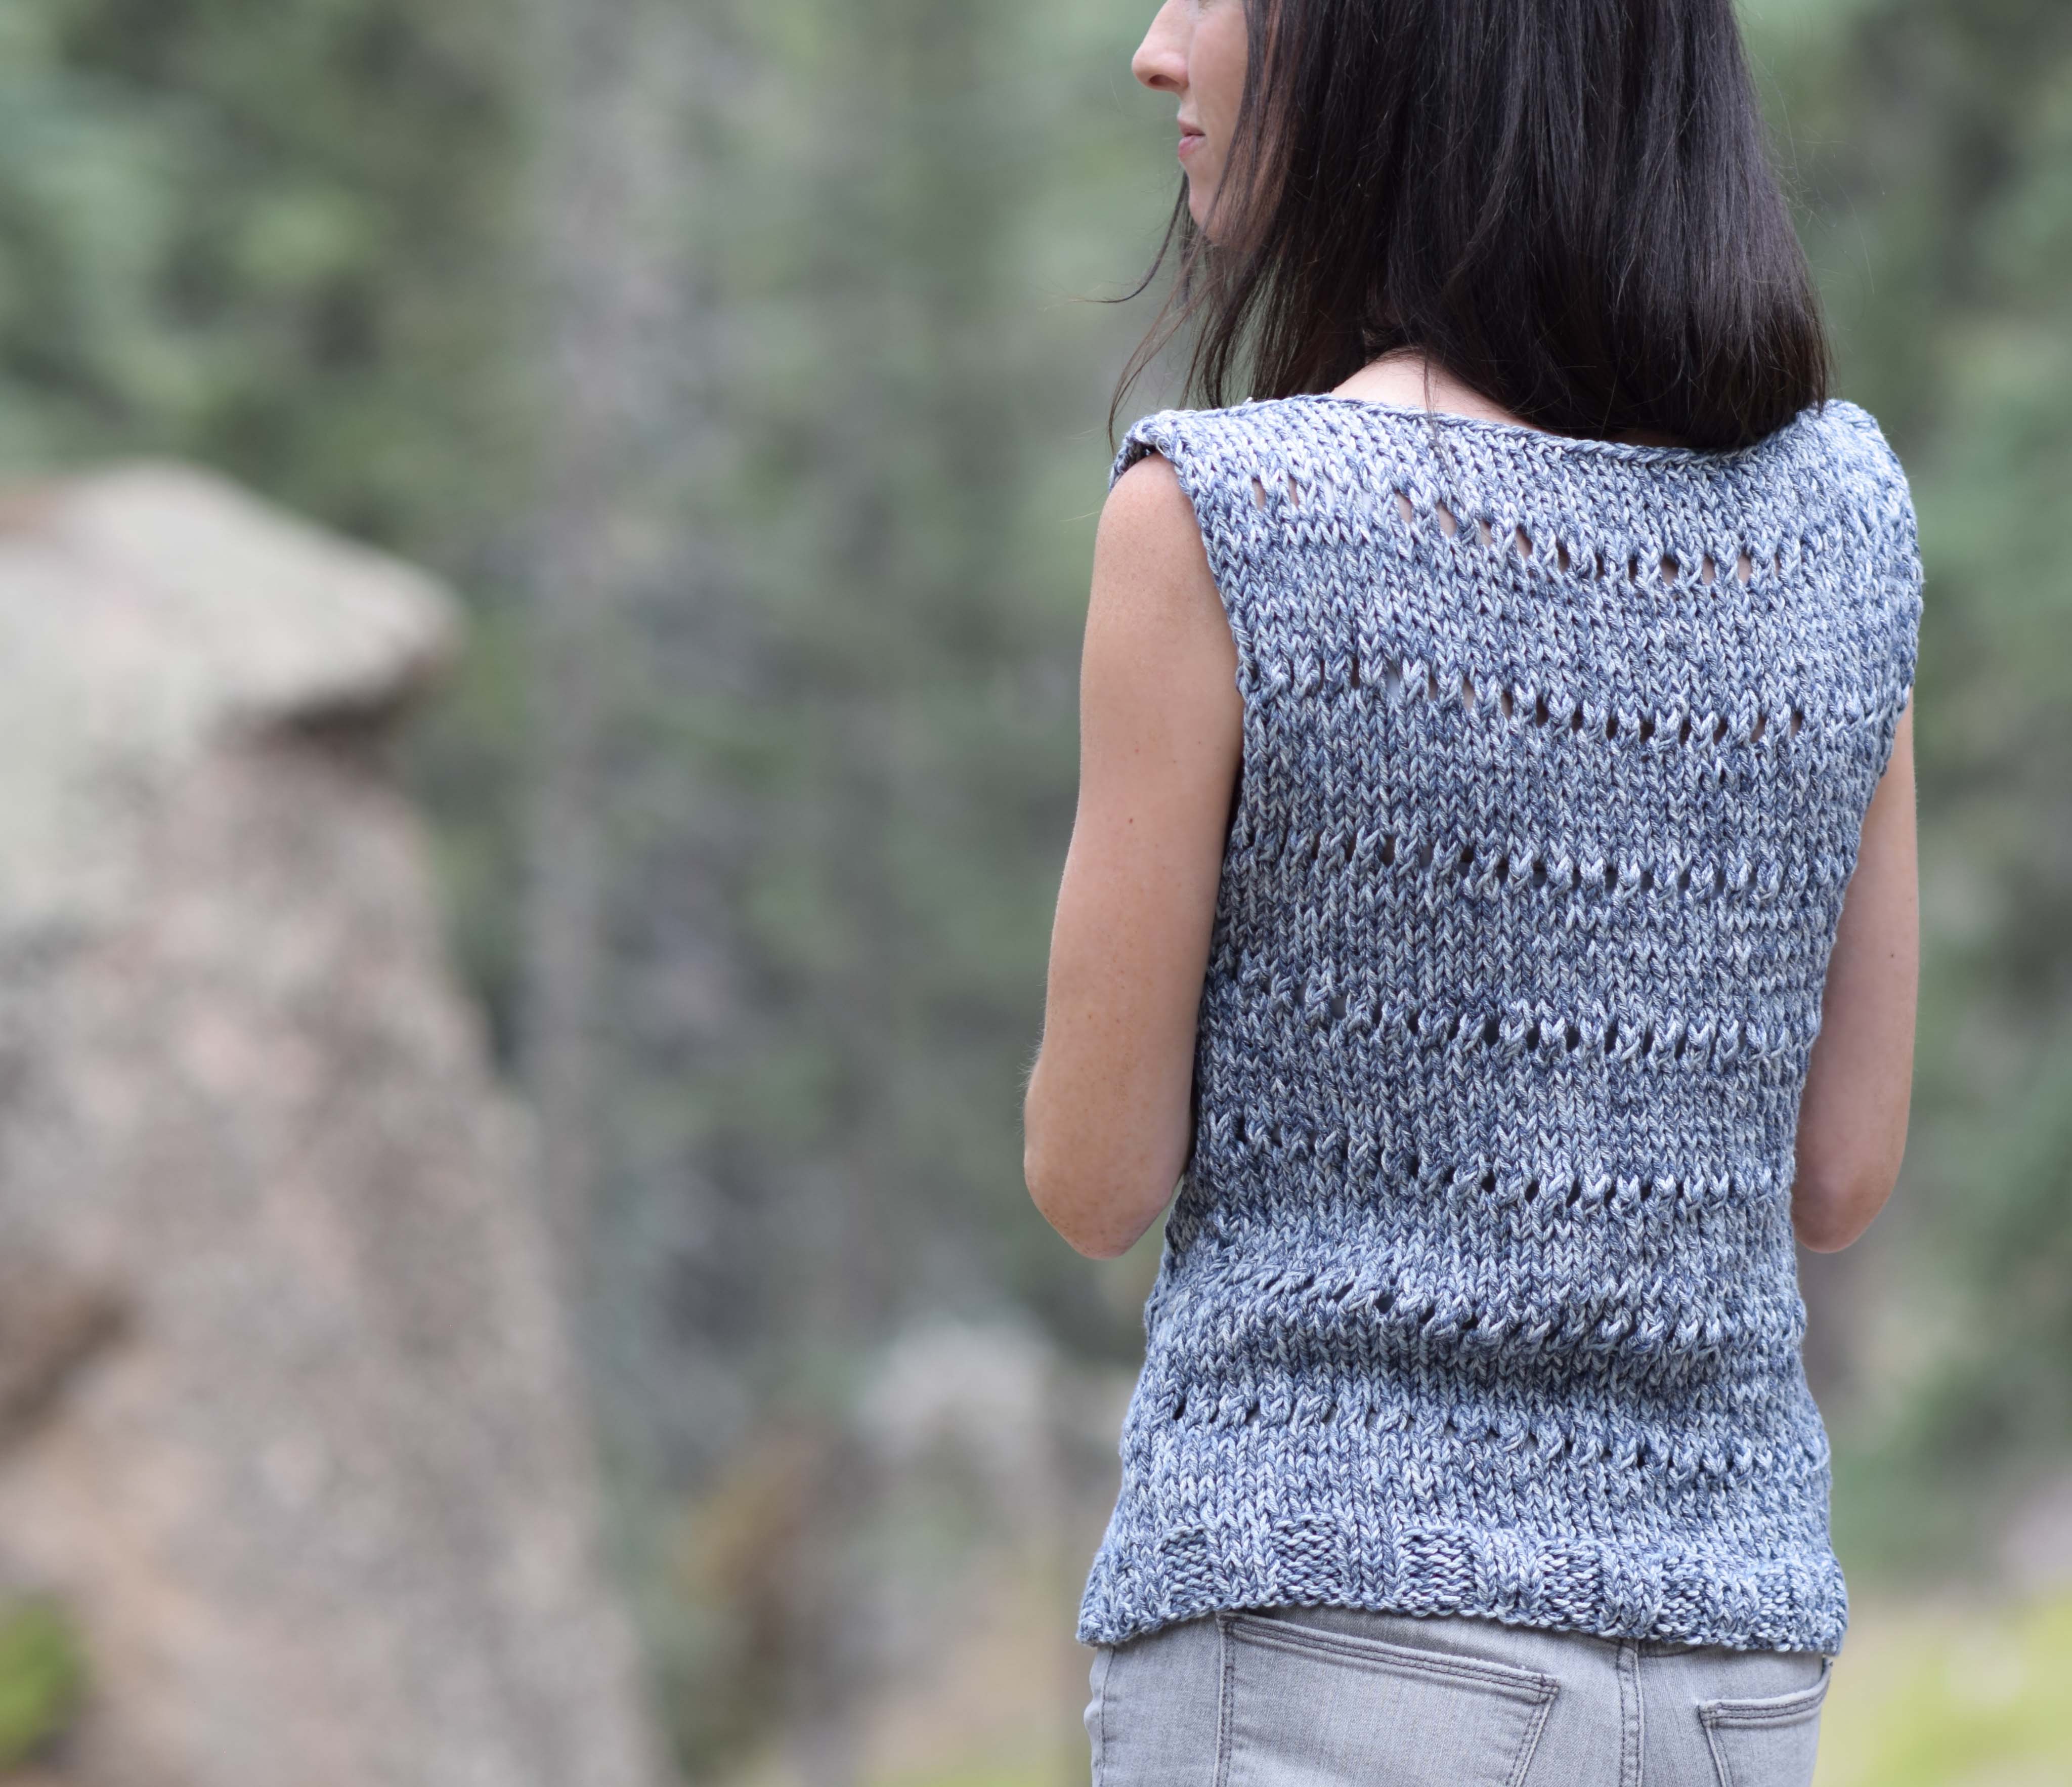 How to Design and Grade a Knitted Set-In Sleeve